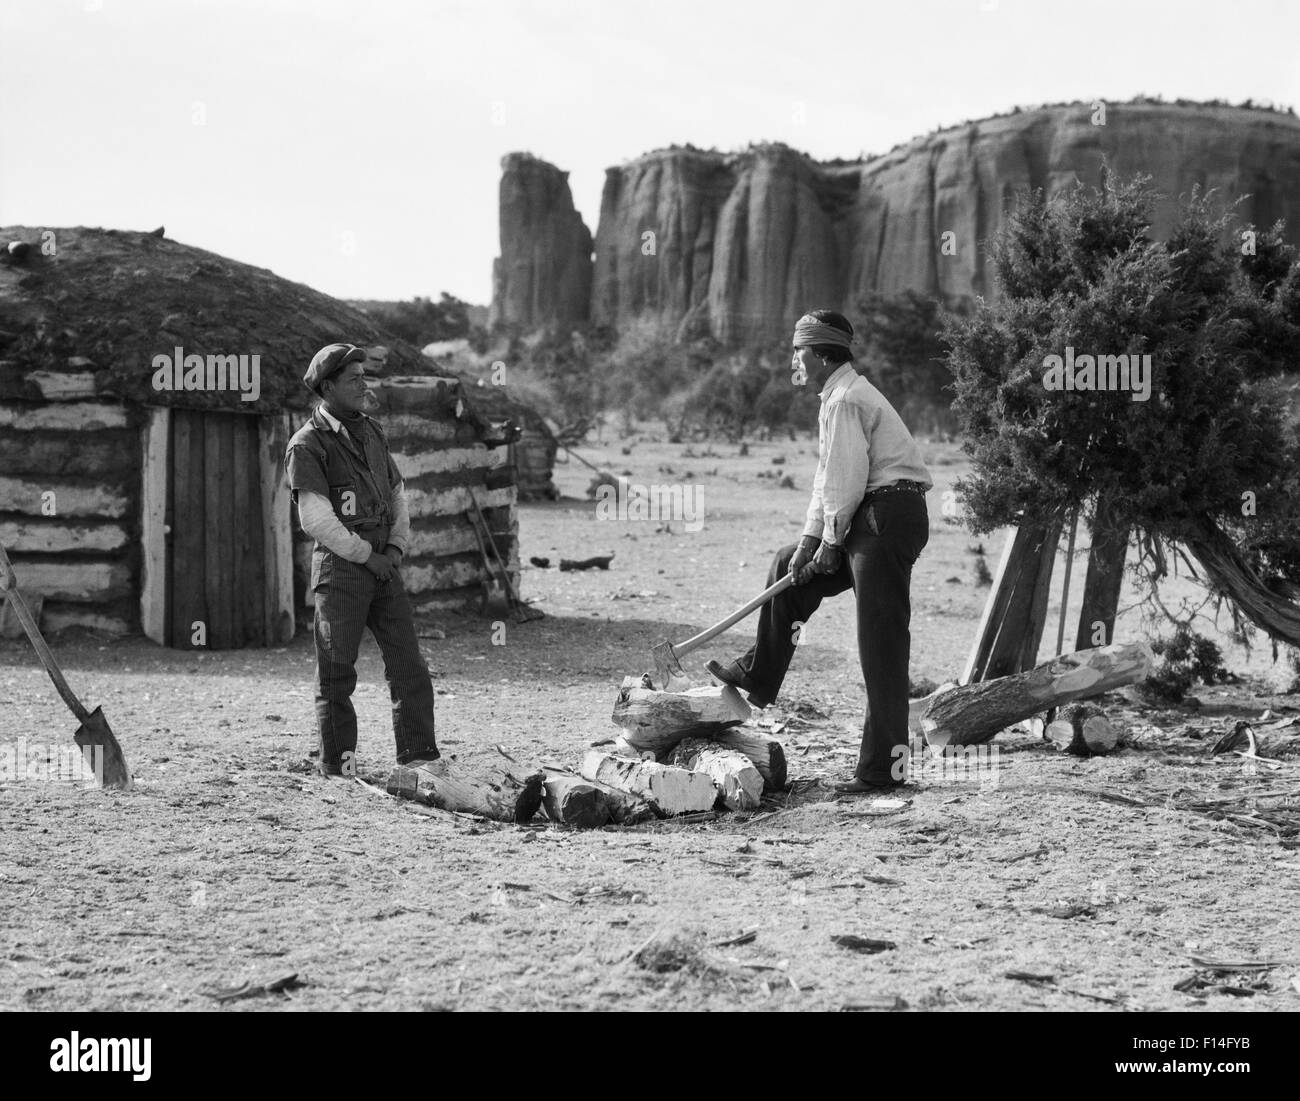 1930s TWO NATIVE AMERICAN NAVAJO MEN SPLITTING FIRE WOOD WITH AX TRADITIONAL HOGAN HOME IS IN THE BACKGROUND Stock Photo